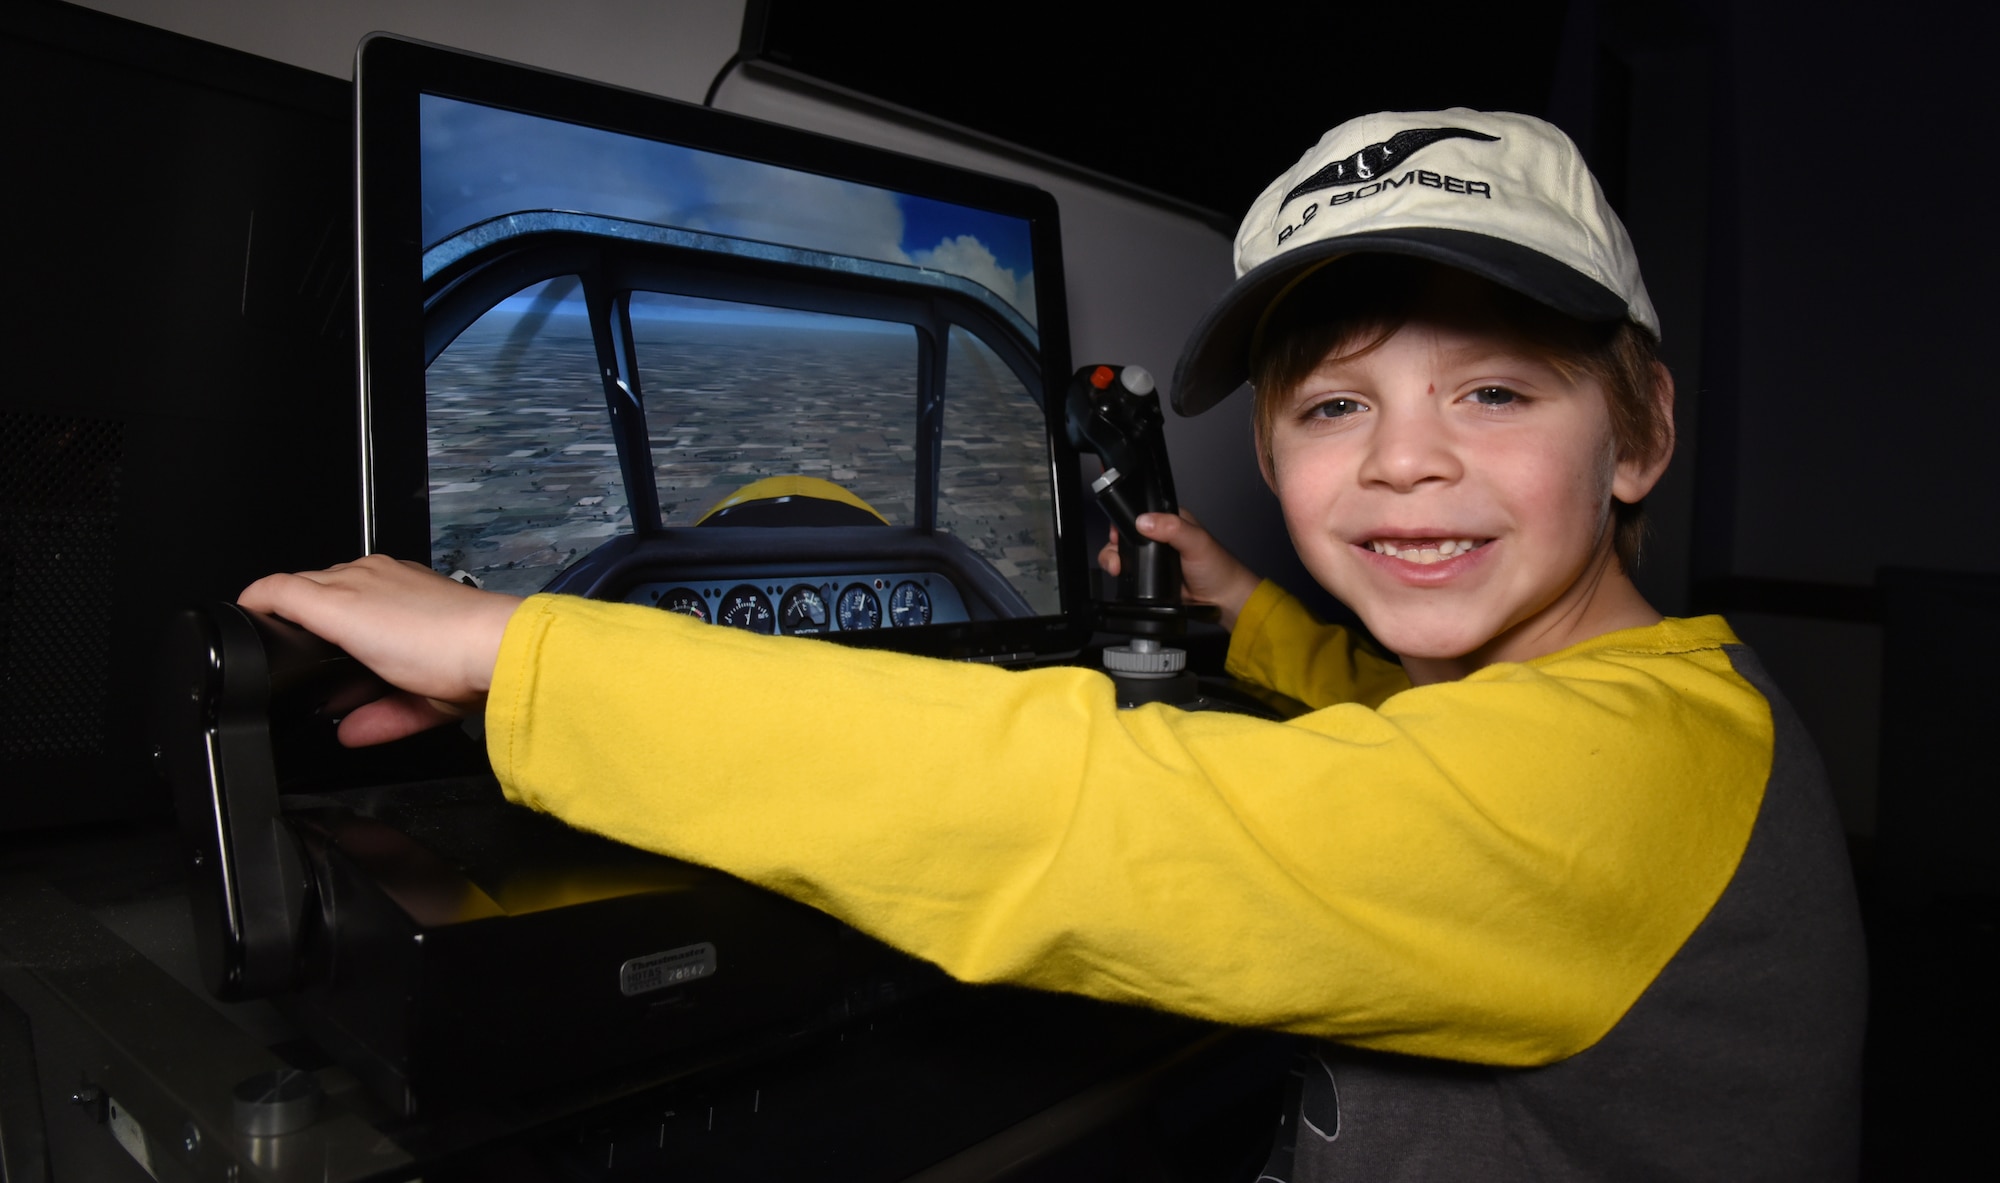 DAYTON, Ohio -- A museum visitor using a flight simulator at the National Museum of the U.S. Air Force. (U.S. Air Force photo)